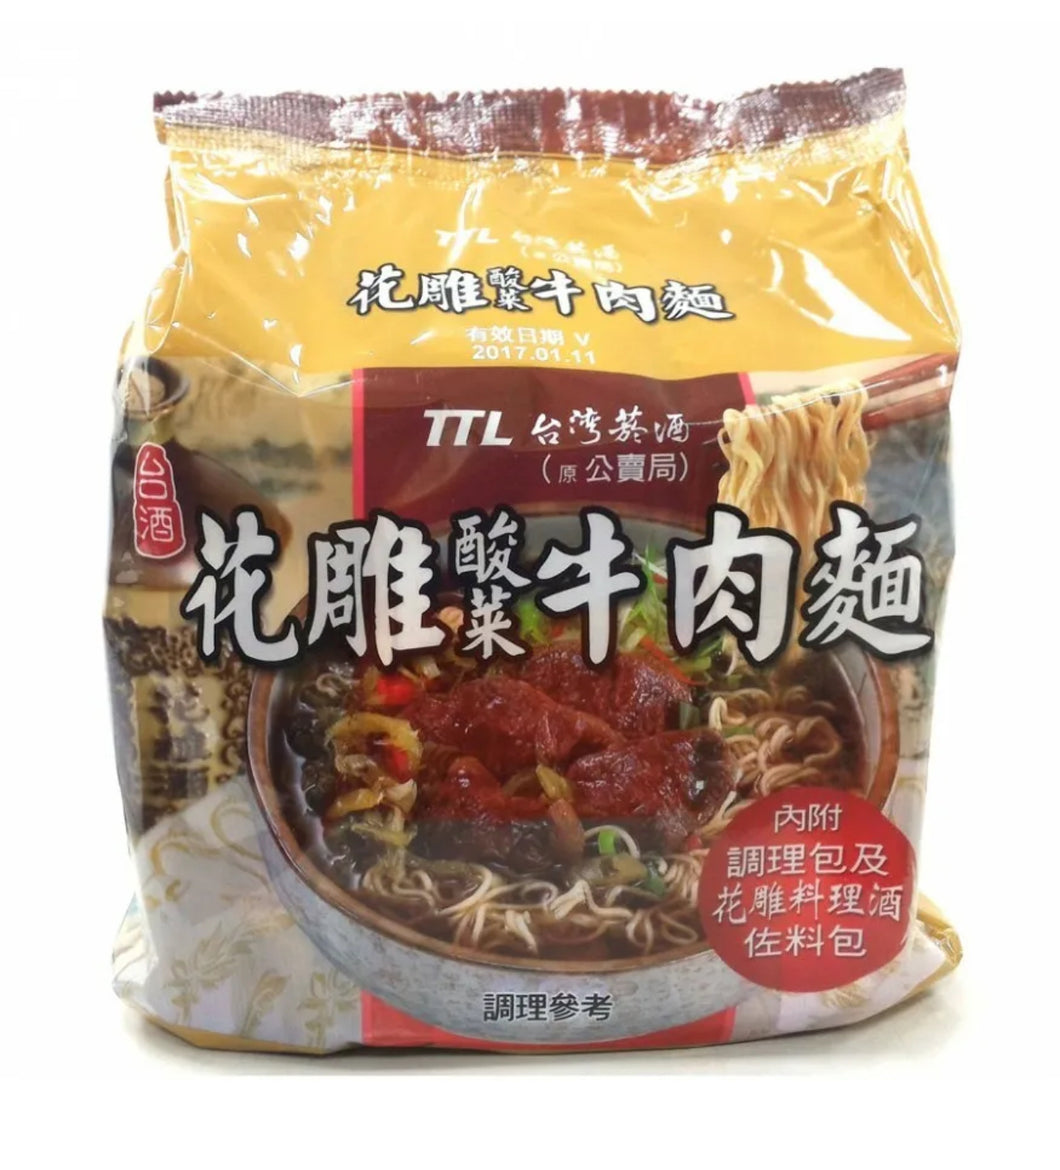 Taiwan TTL 台酒花雕酸菜牛肉麵 Hua Diao Beef with Sauerkraut Instant Noodle 3Pack (200g)